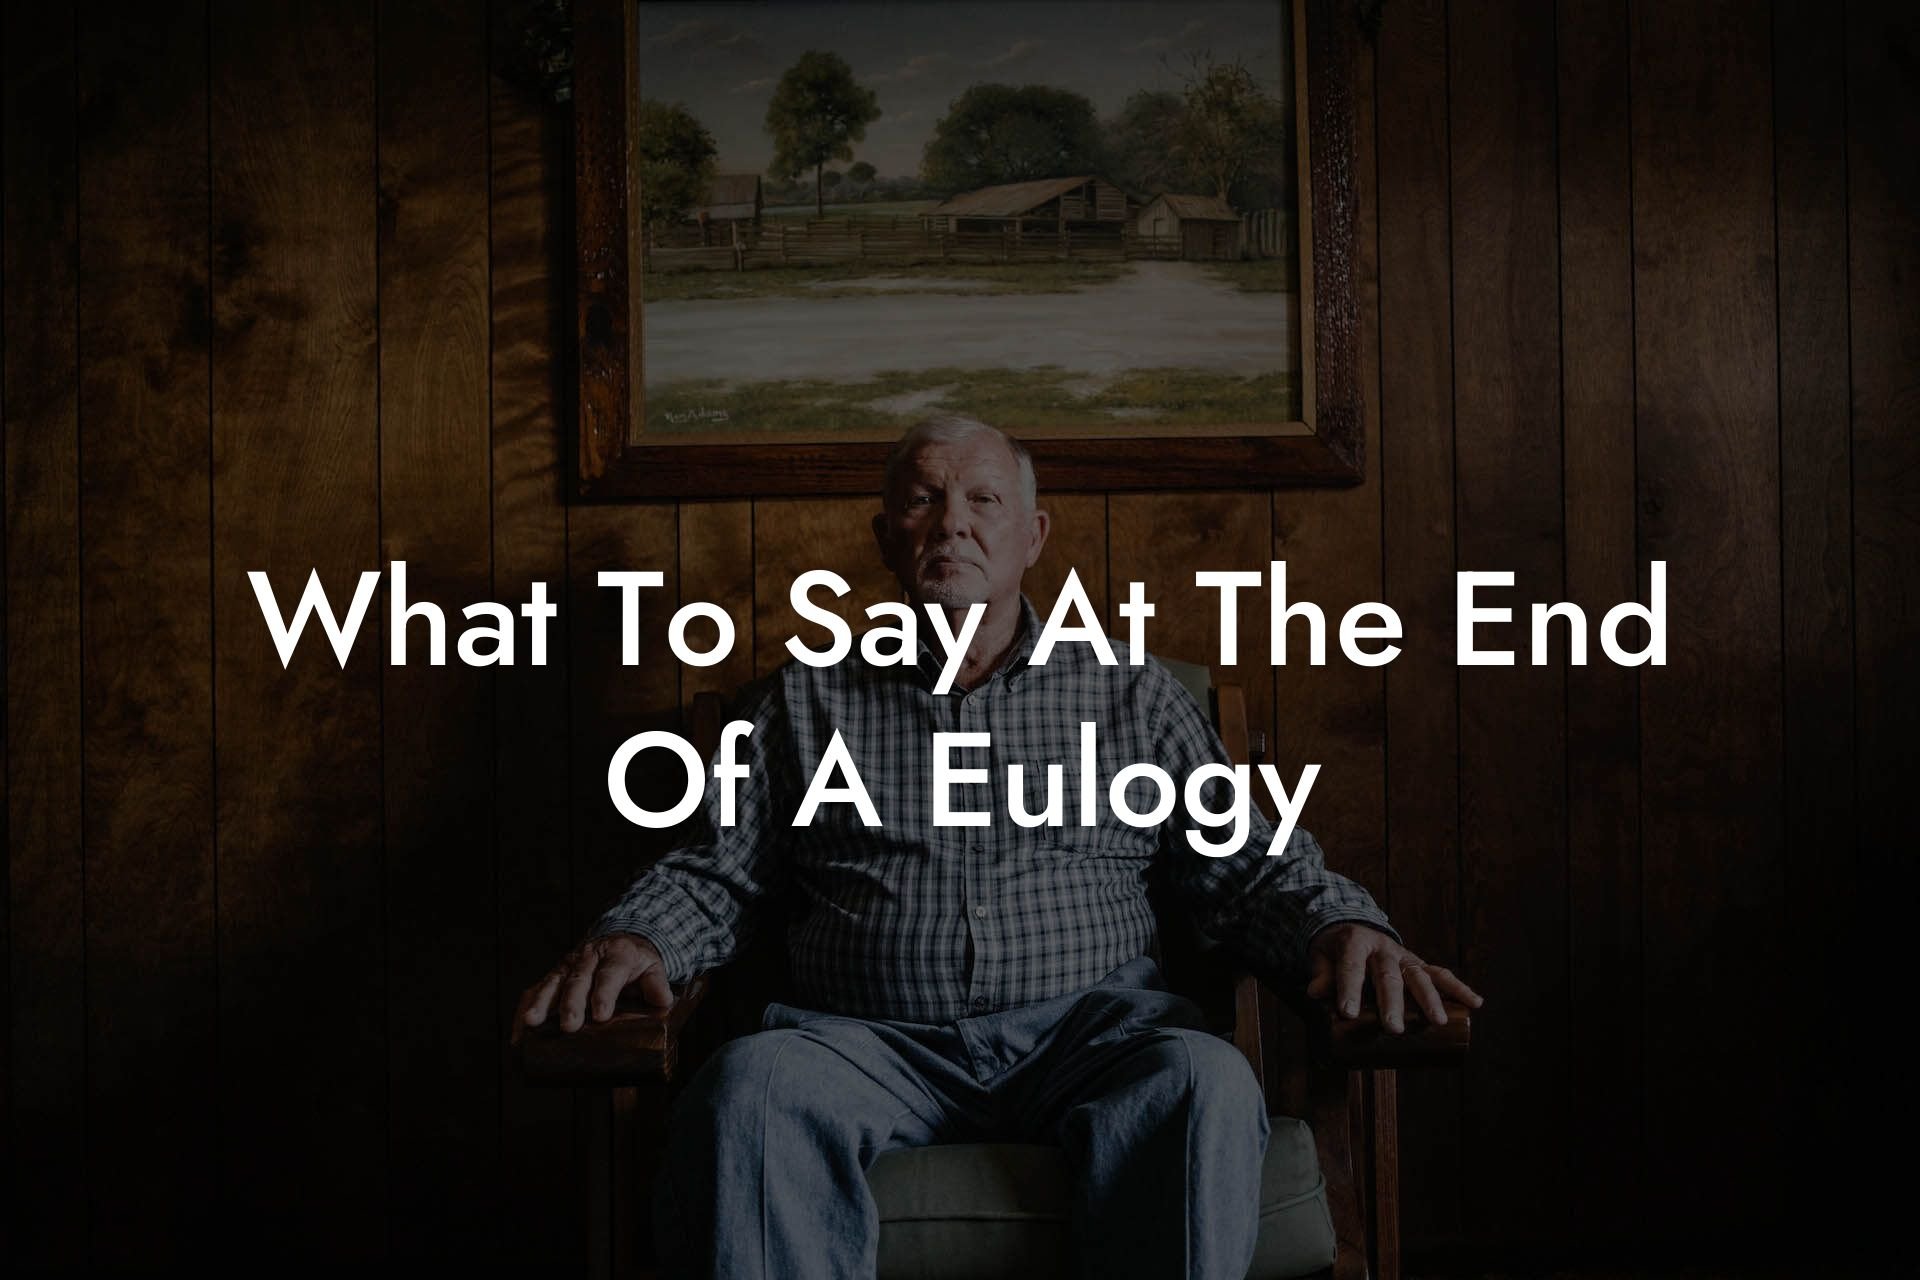 What To Say At The End Of A Eulogy